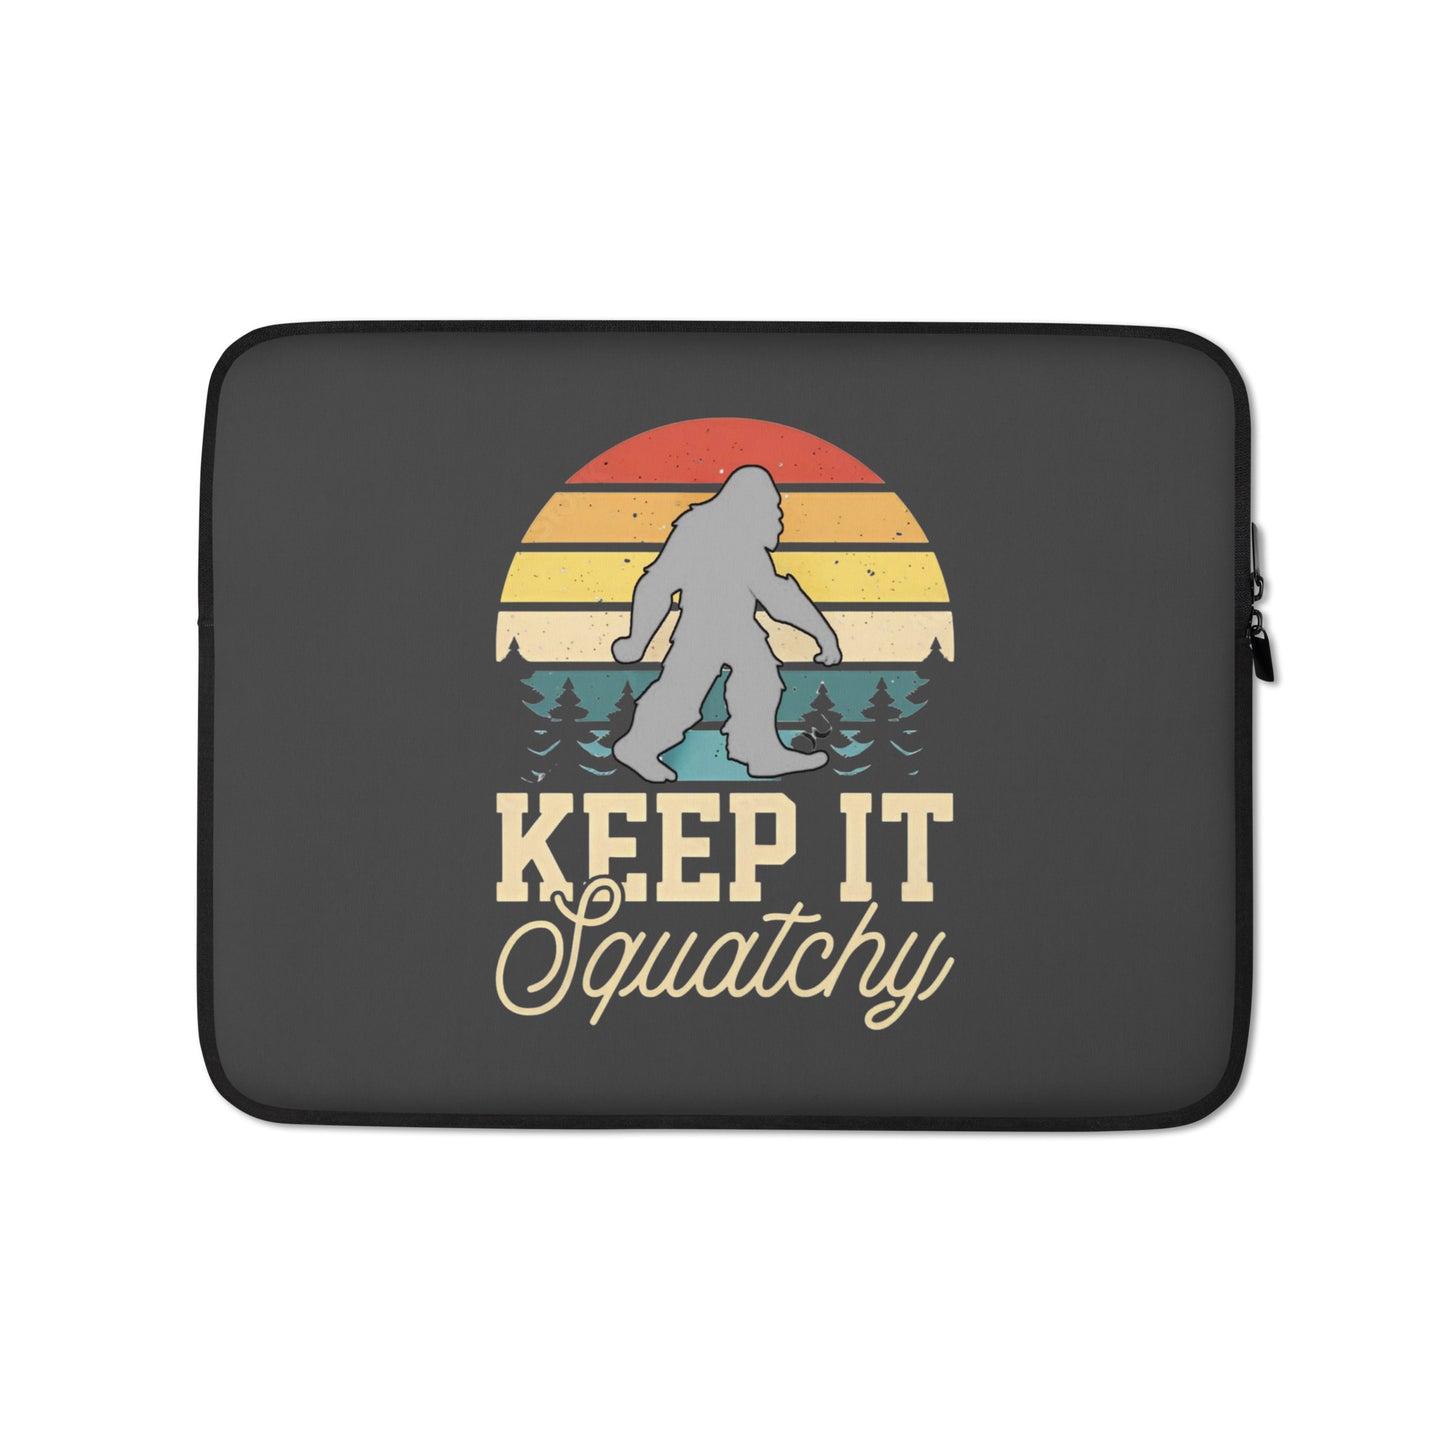 Keeping it Squatchy Laptop Sleeve